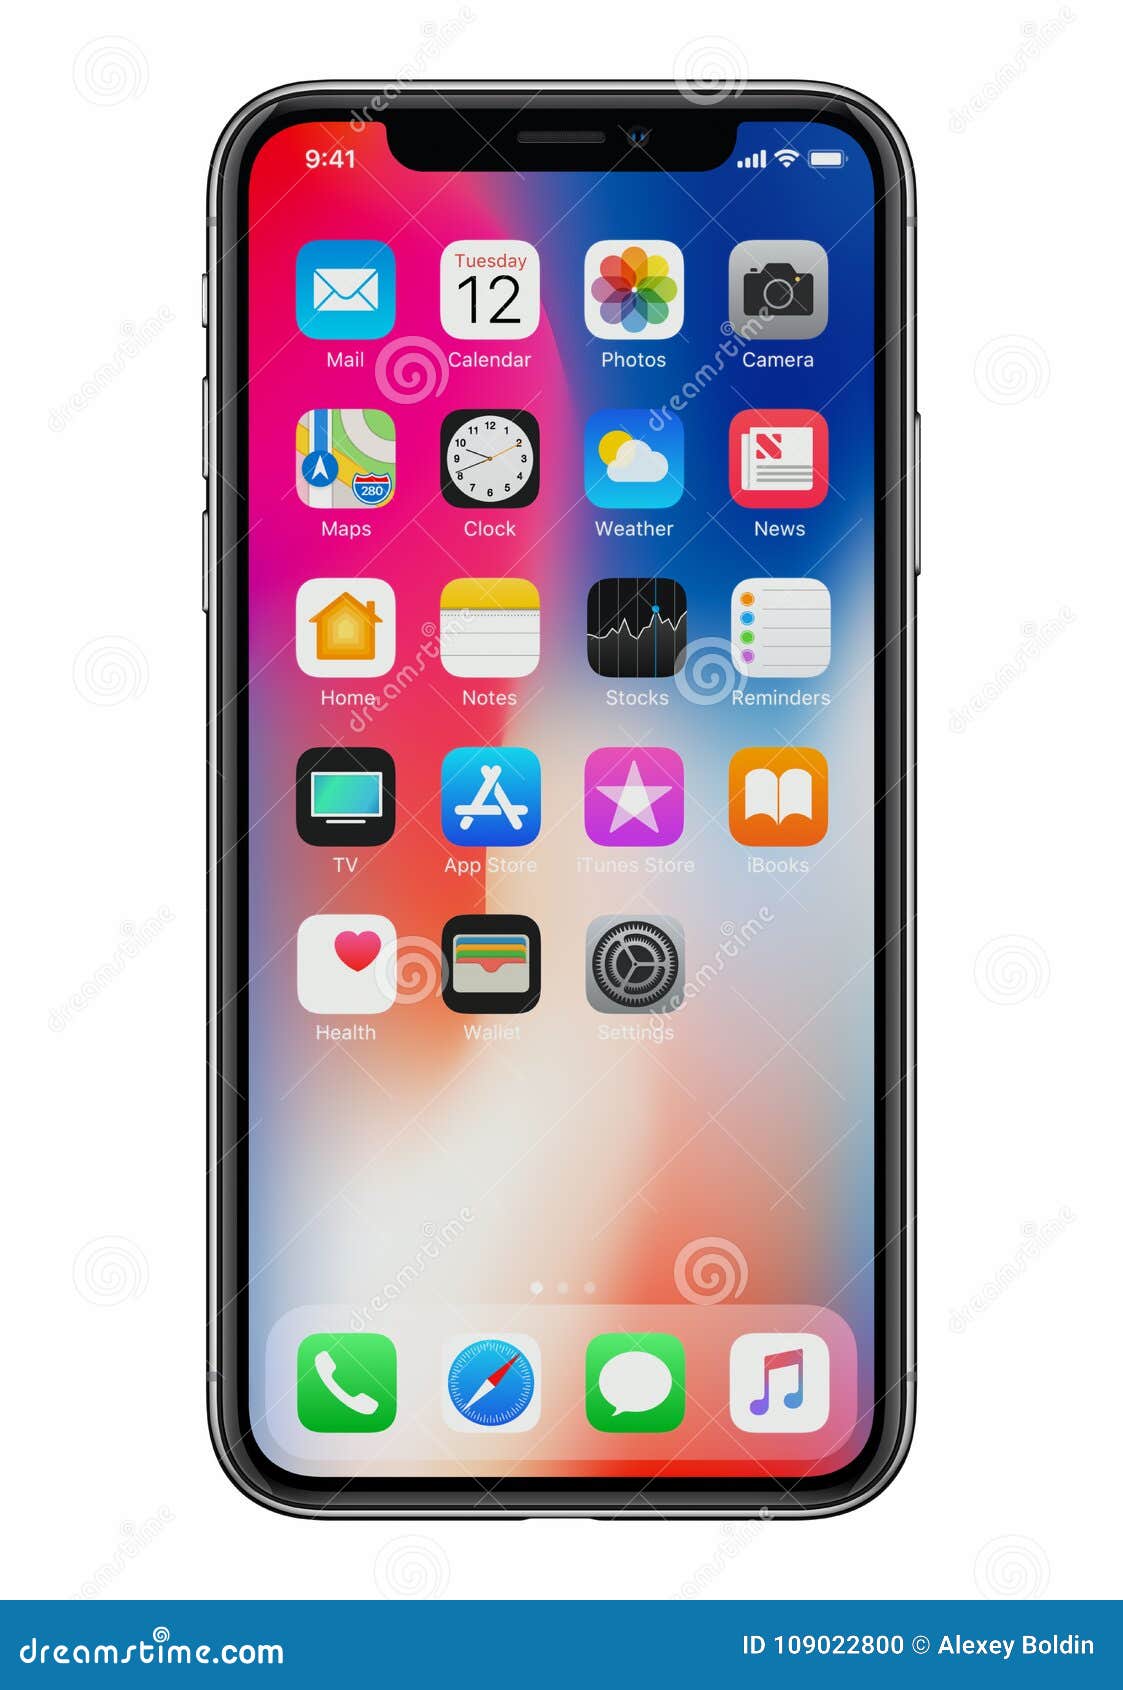 New Apple IPhone X Front View on White Background Editorial Image - Image  of application, mockup: 109022800